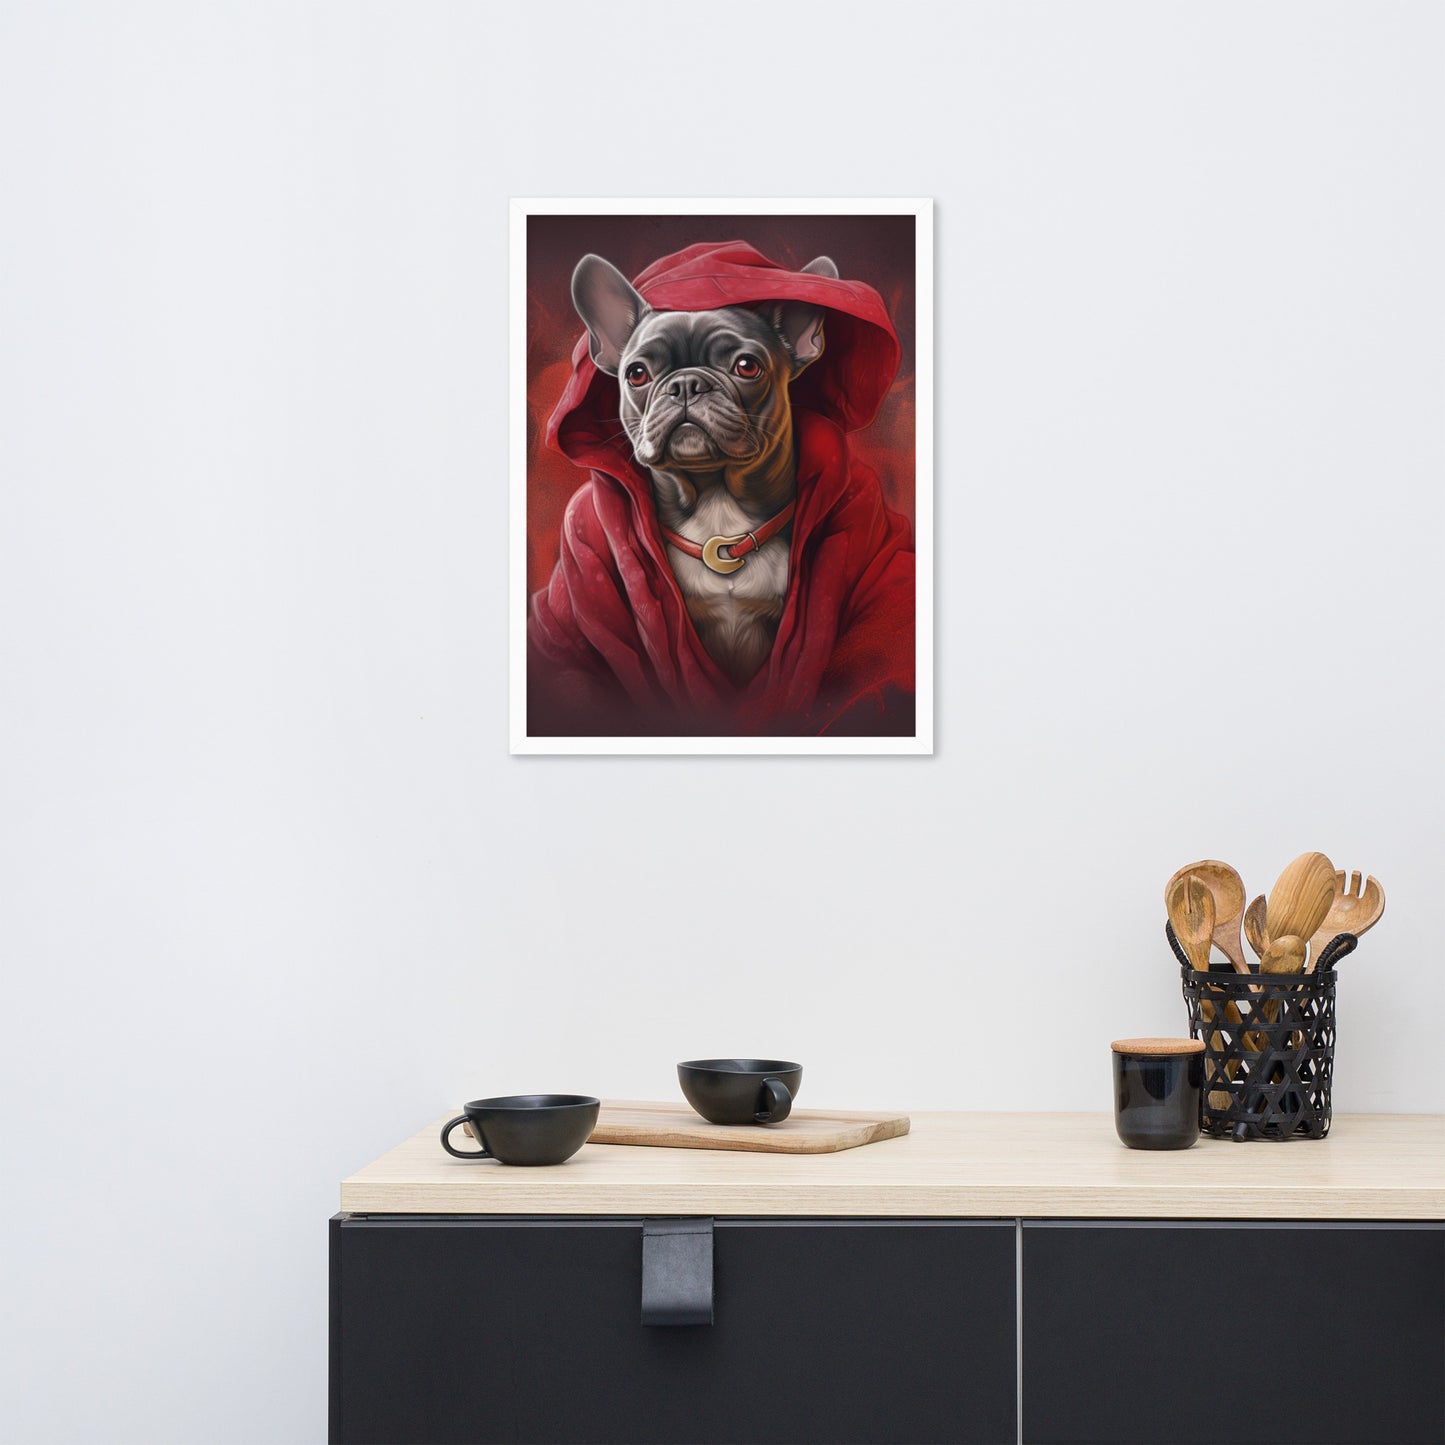 Elegant Frenchie Framed Poster - Signature Canine Wall Art